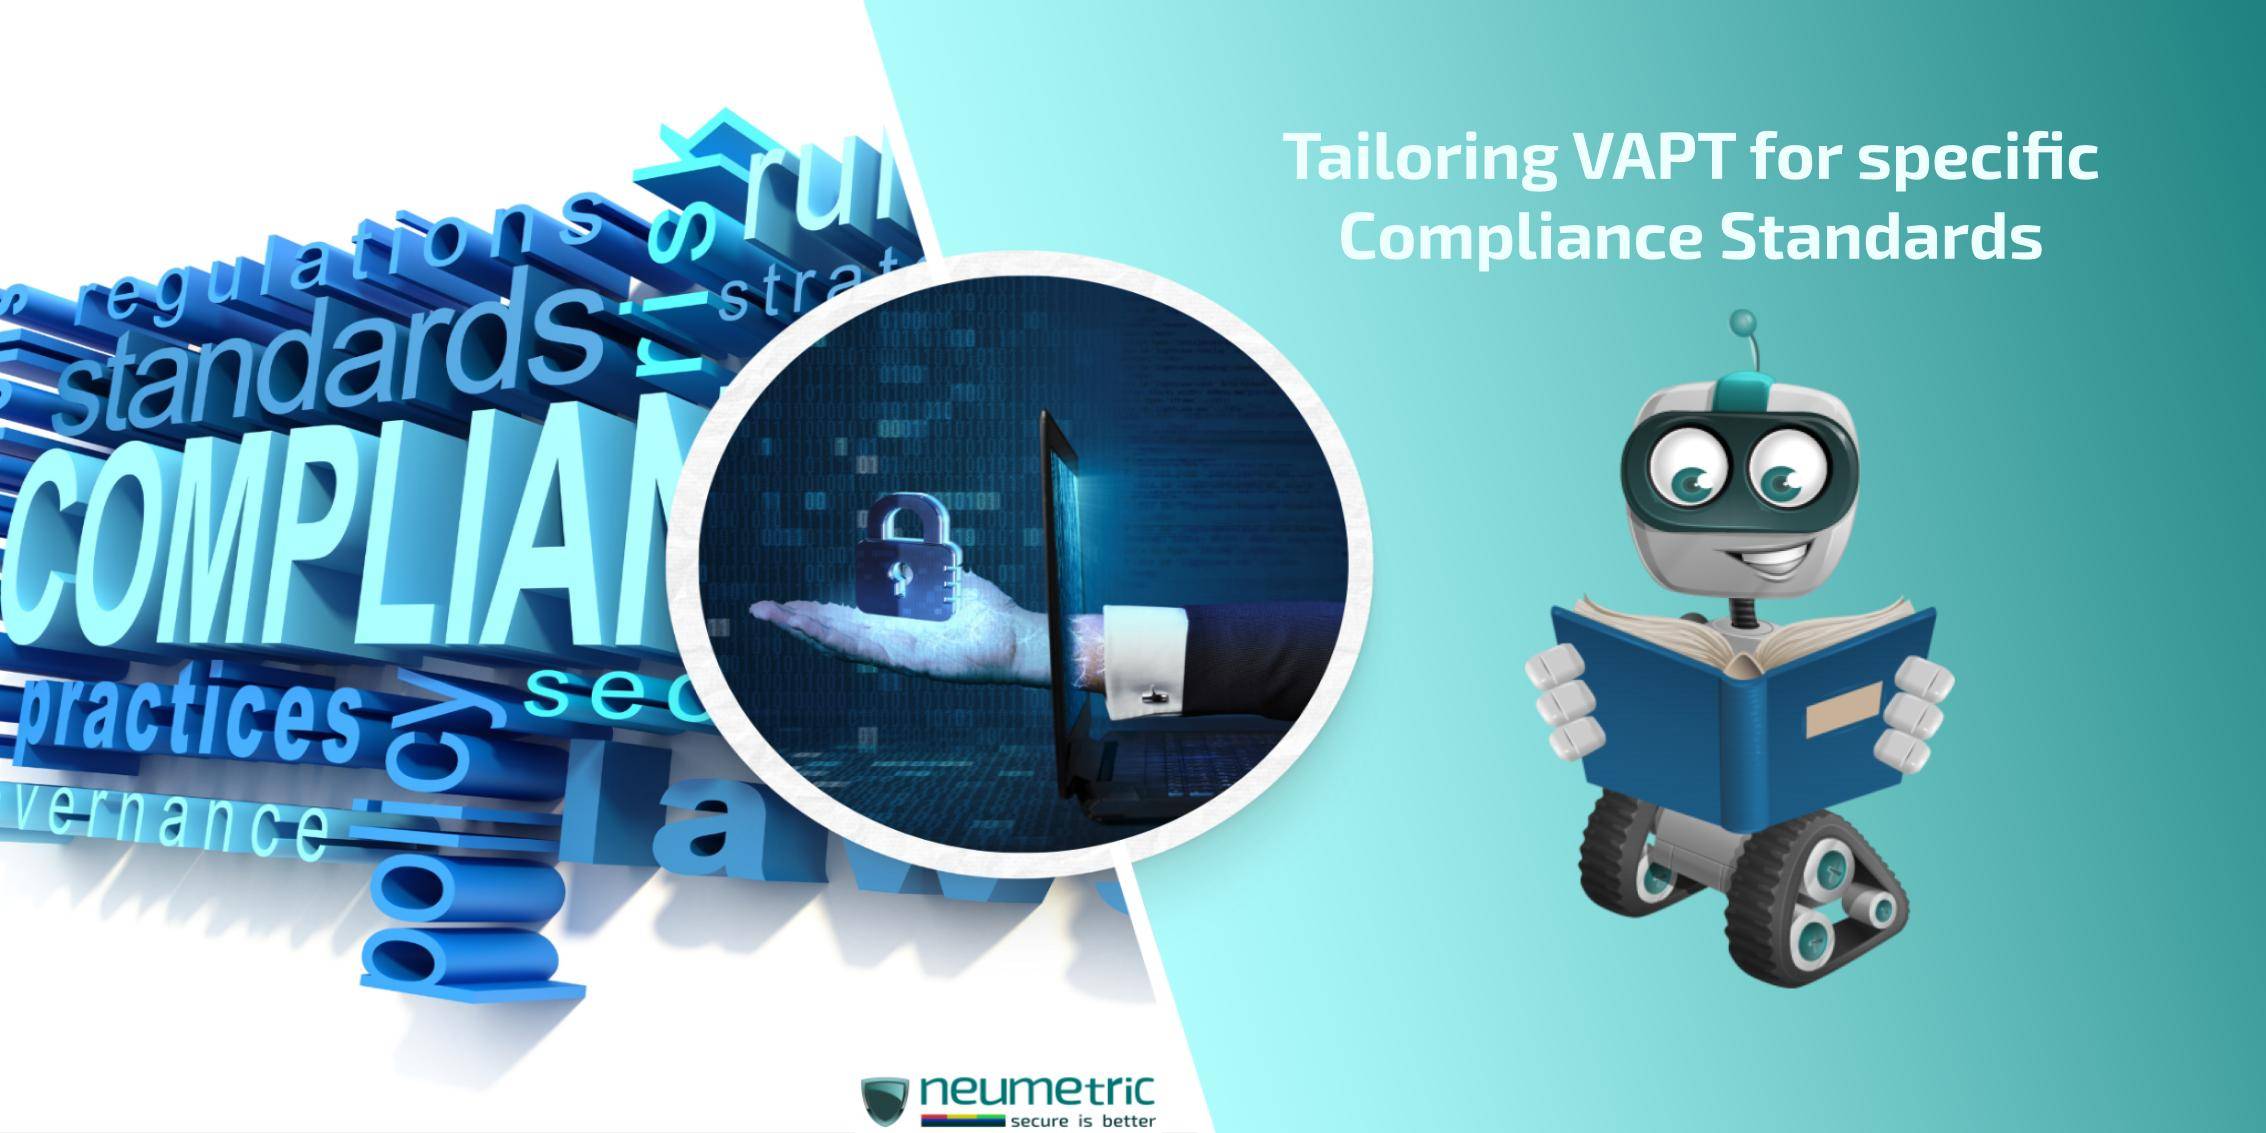 Tailoring VAPT for specific Compliance Standards